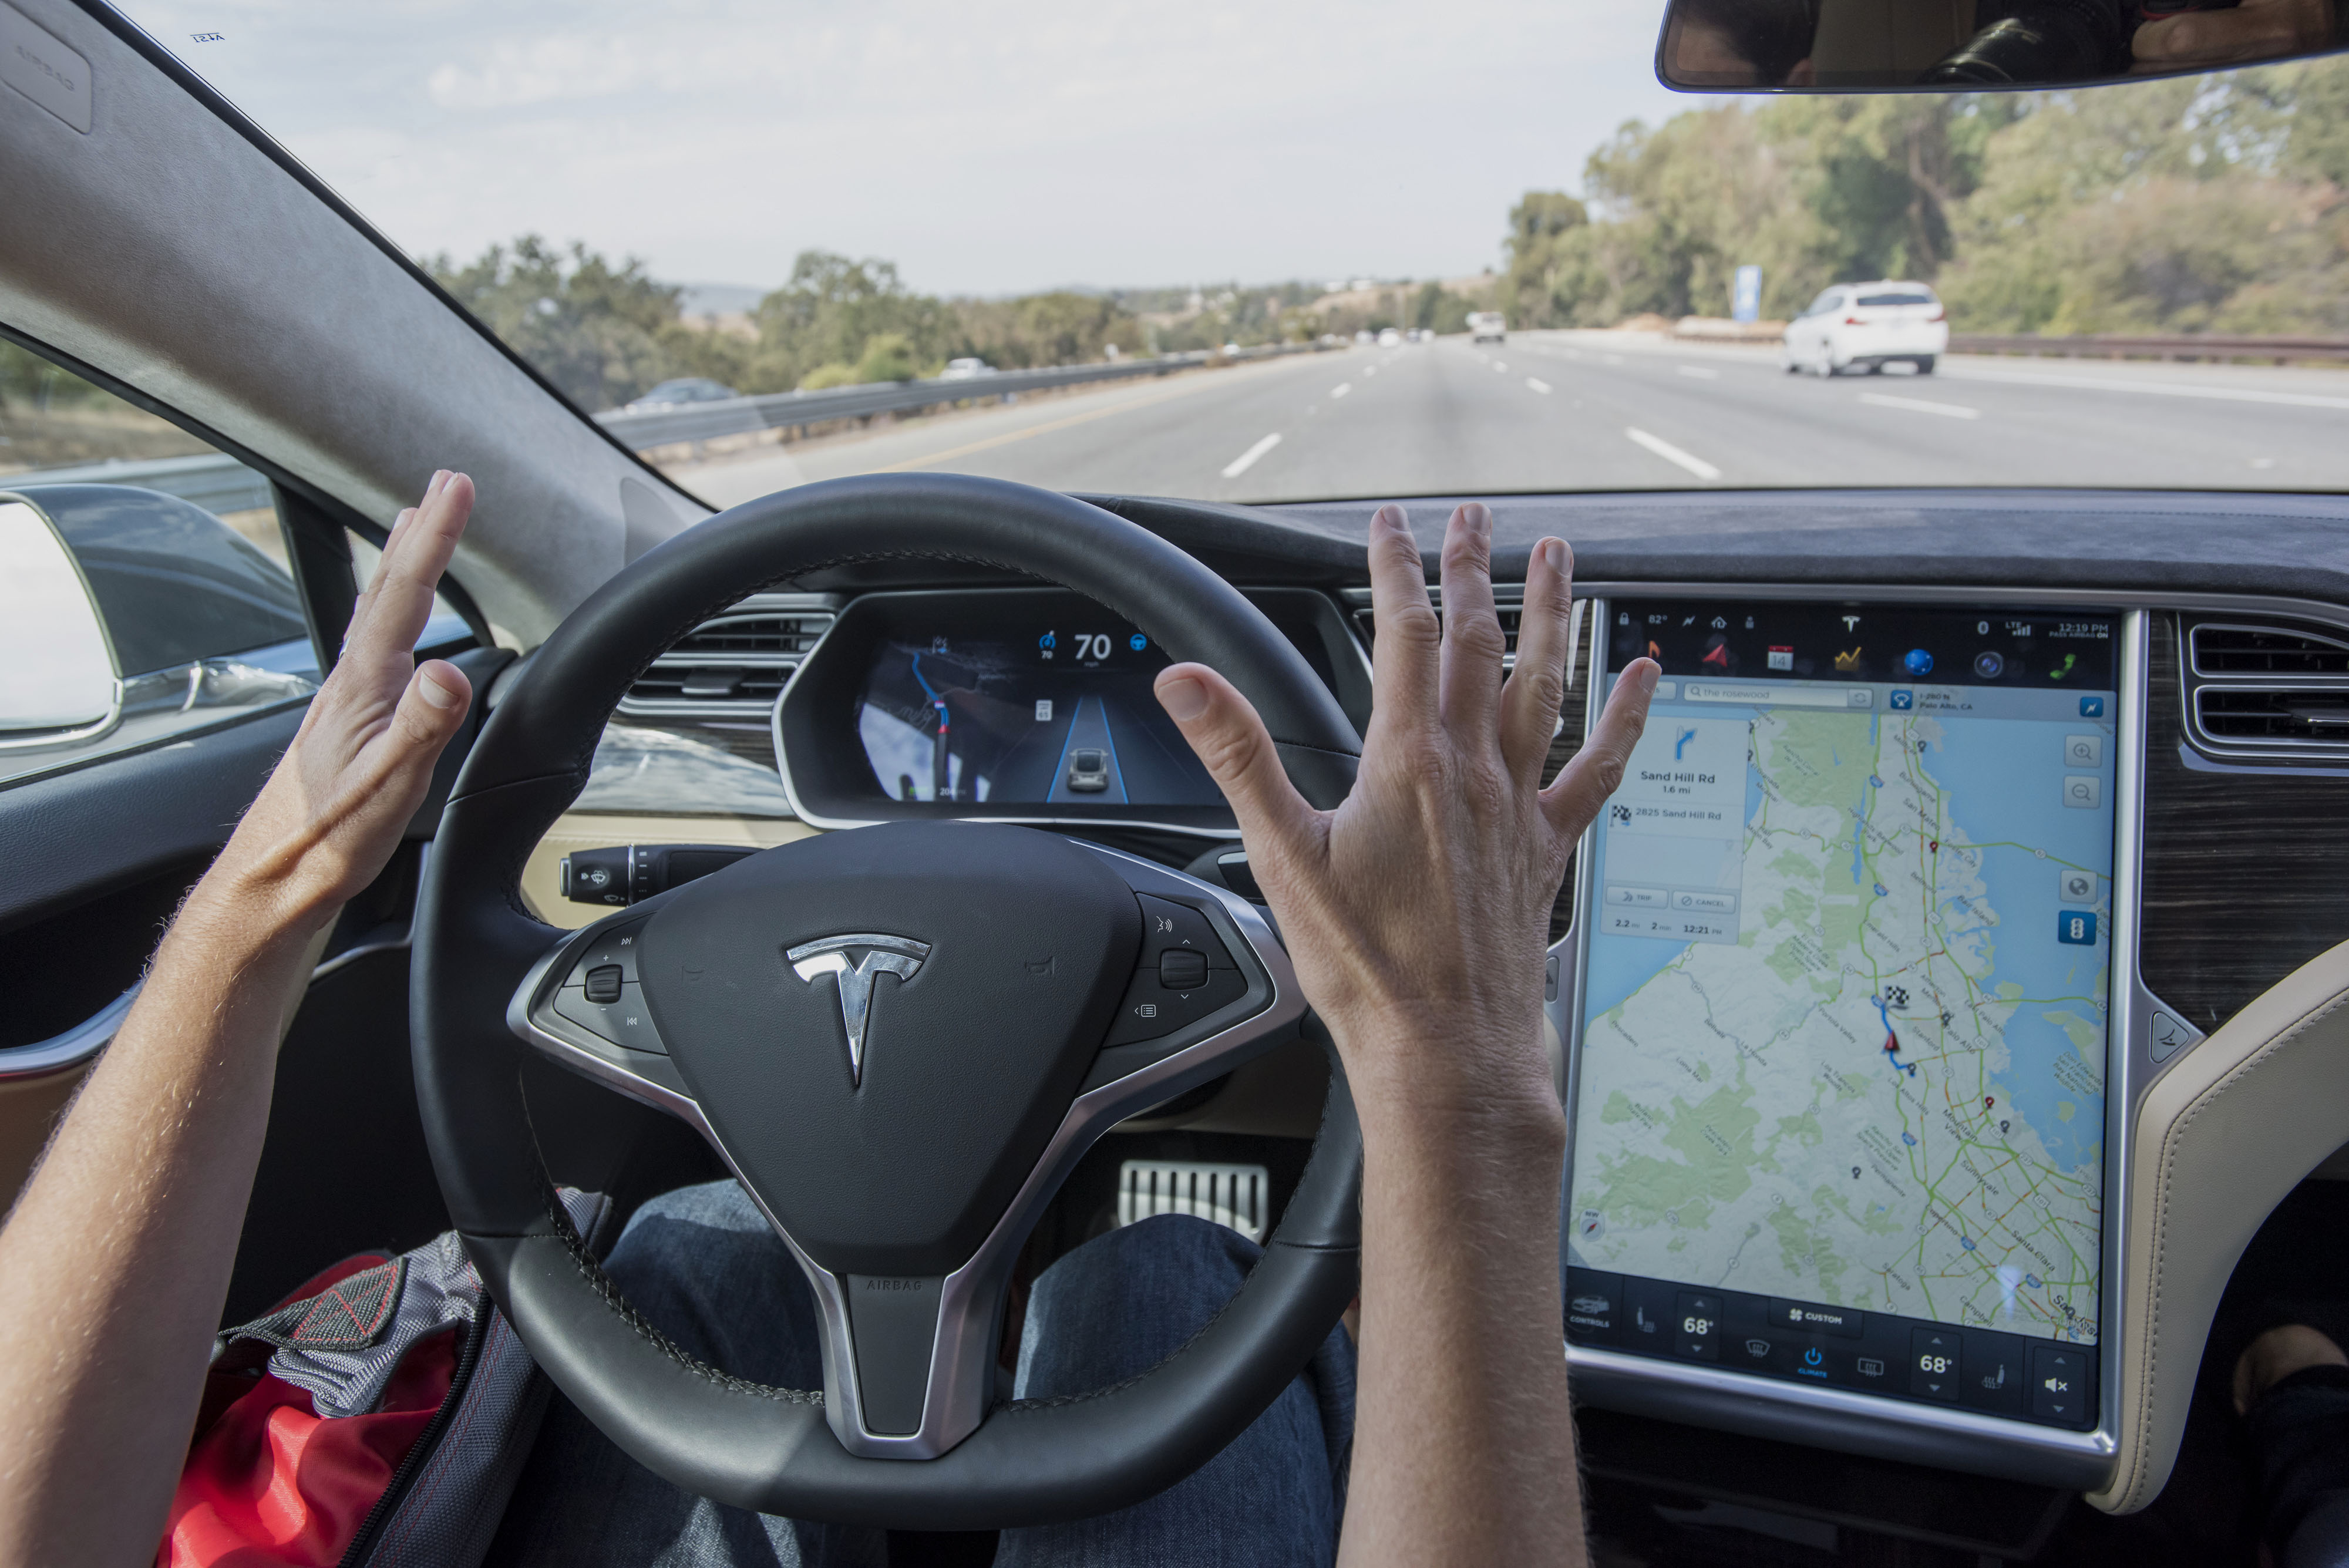 A member of the media test drives a Tesla Motors Inc. Model S car equipped with Autopilot in Palo Alto, Oct. 14, 2015. (David Paul Morris—Bloomberg/Getty Images)